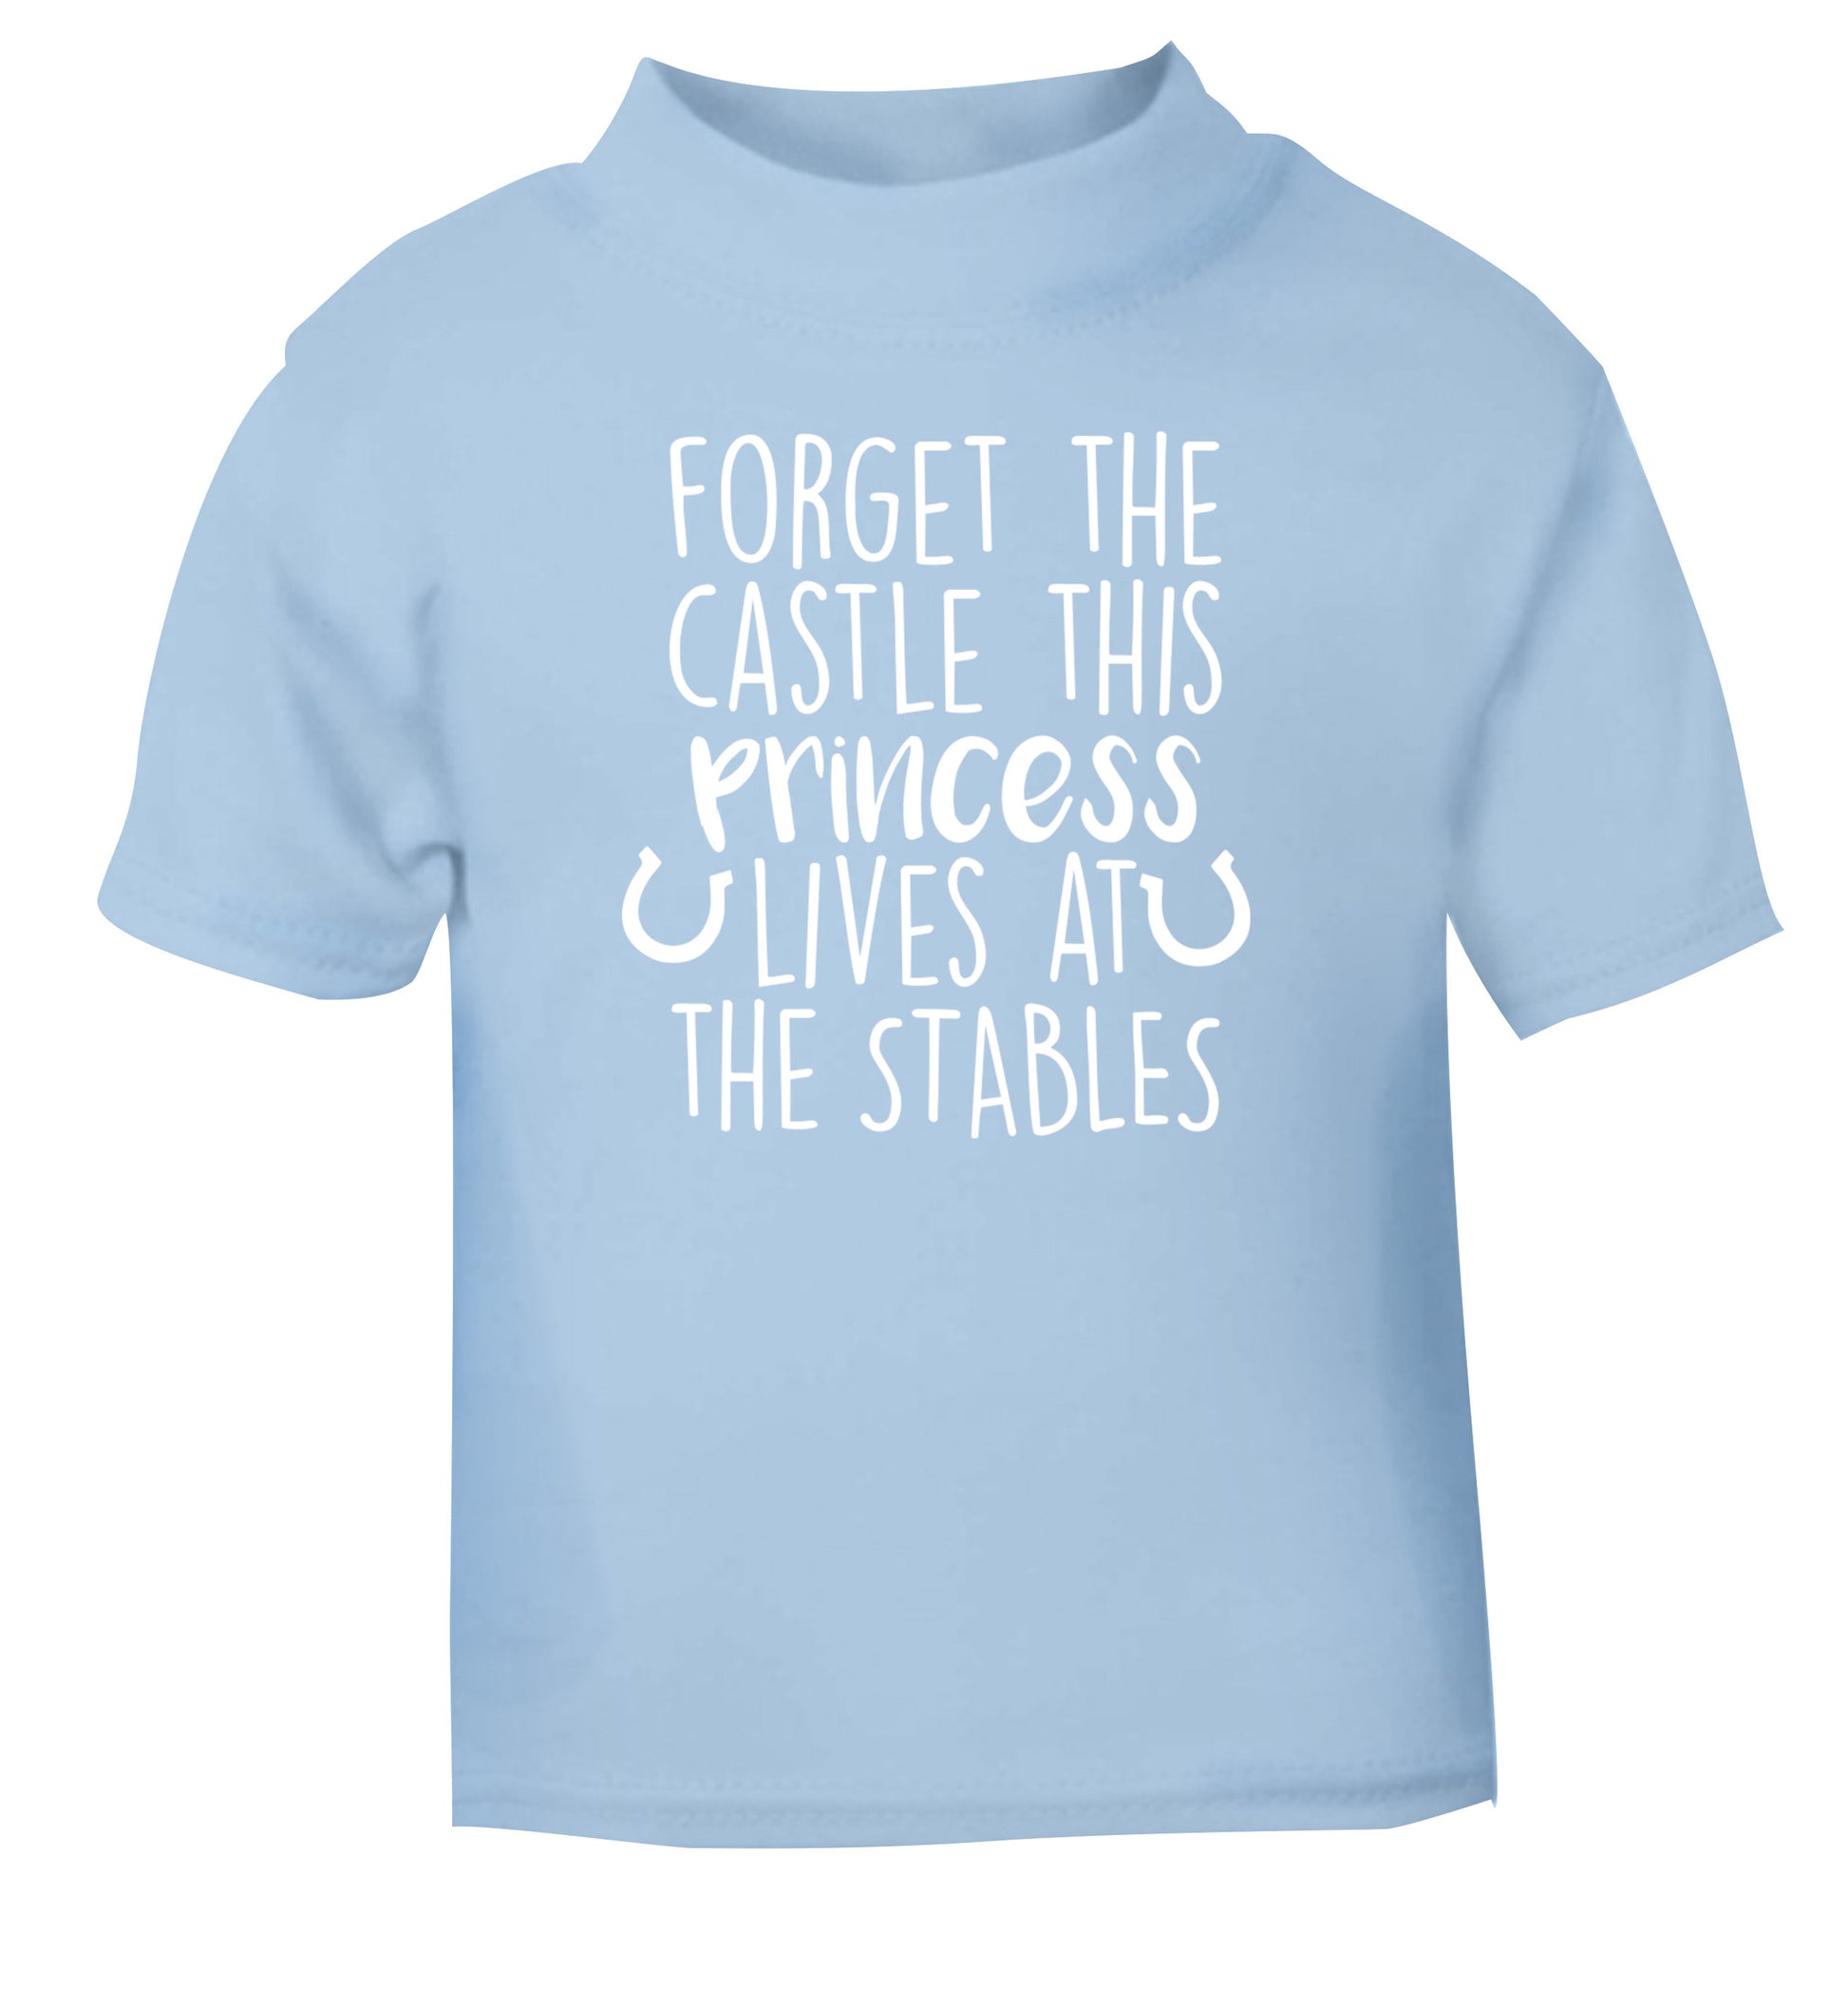 Forget the castle this princess lives at the stables light blue Baby Toddler Tshirt 2 Years